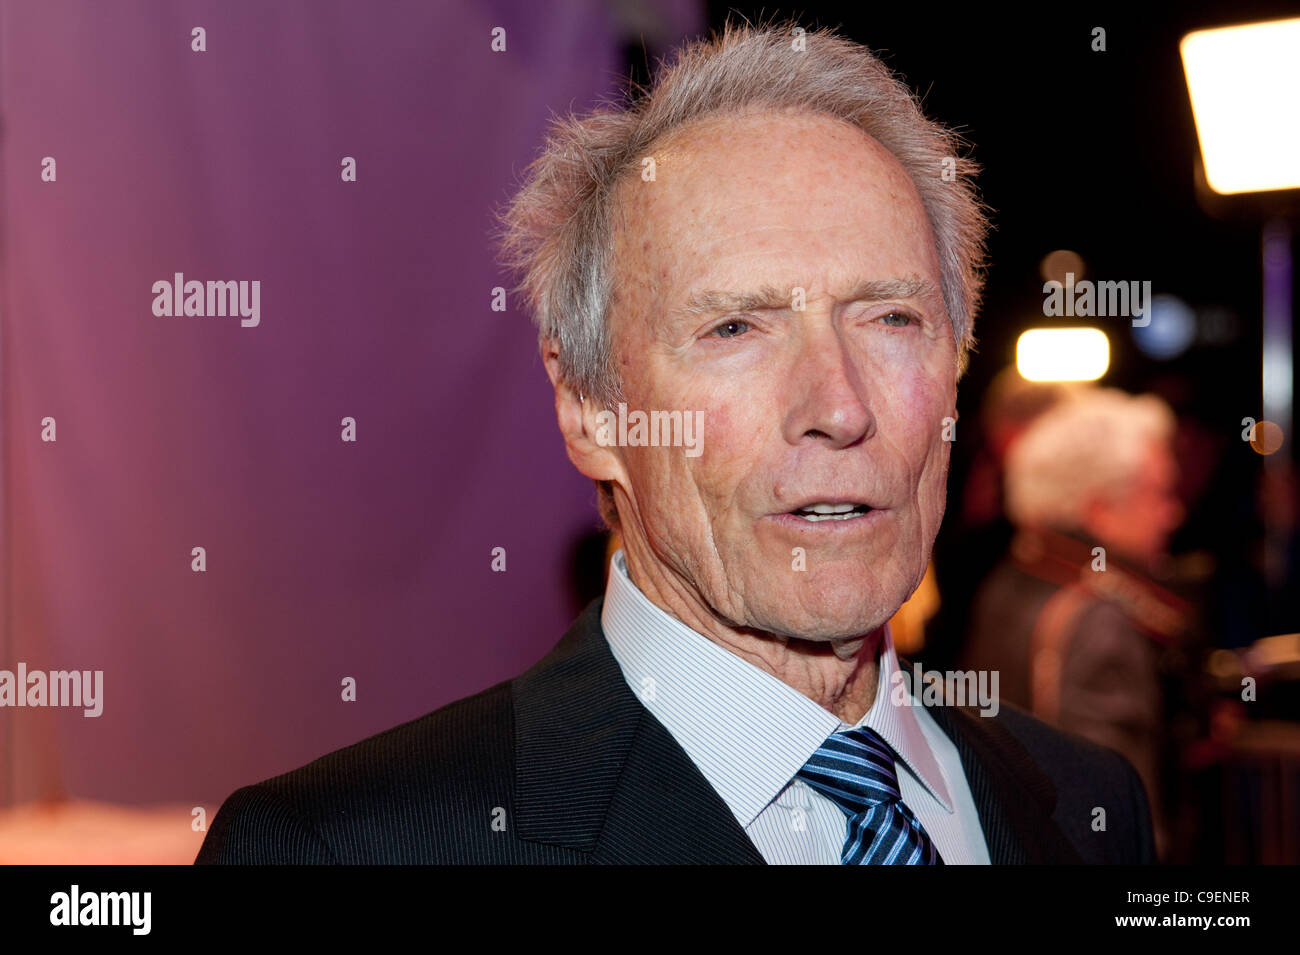 SACRAMENTO, CA - December 8: Clint Eastwood arrives at the California Hall of Fame ceremonies at the Sacramento Memorial Auditorium in Sacramento, California on December 8, 2011 Stock Photo